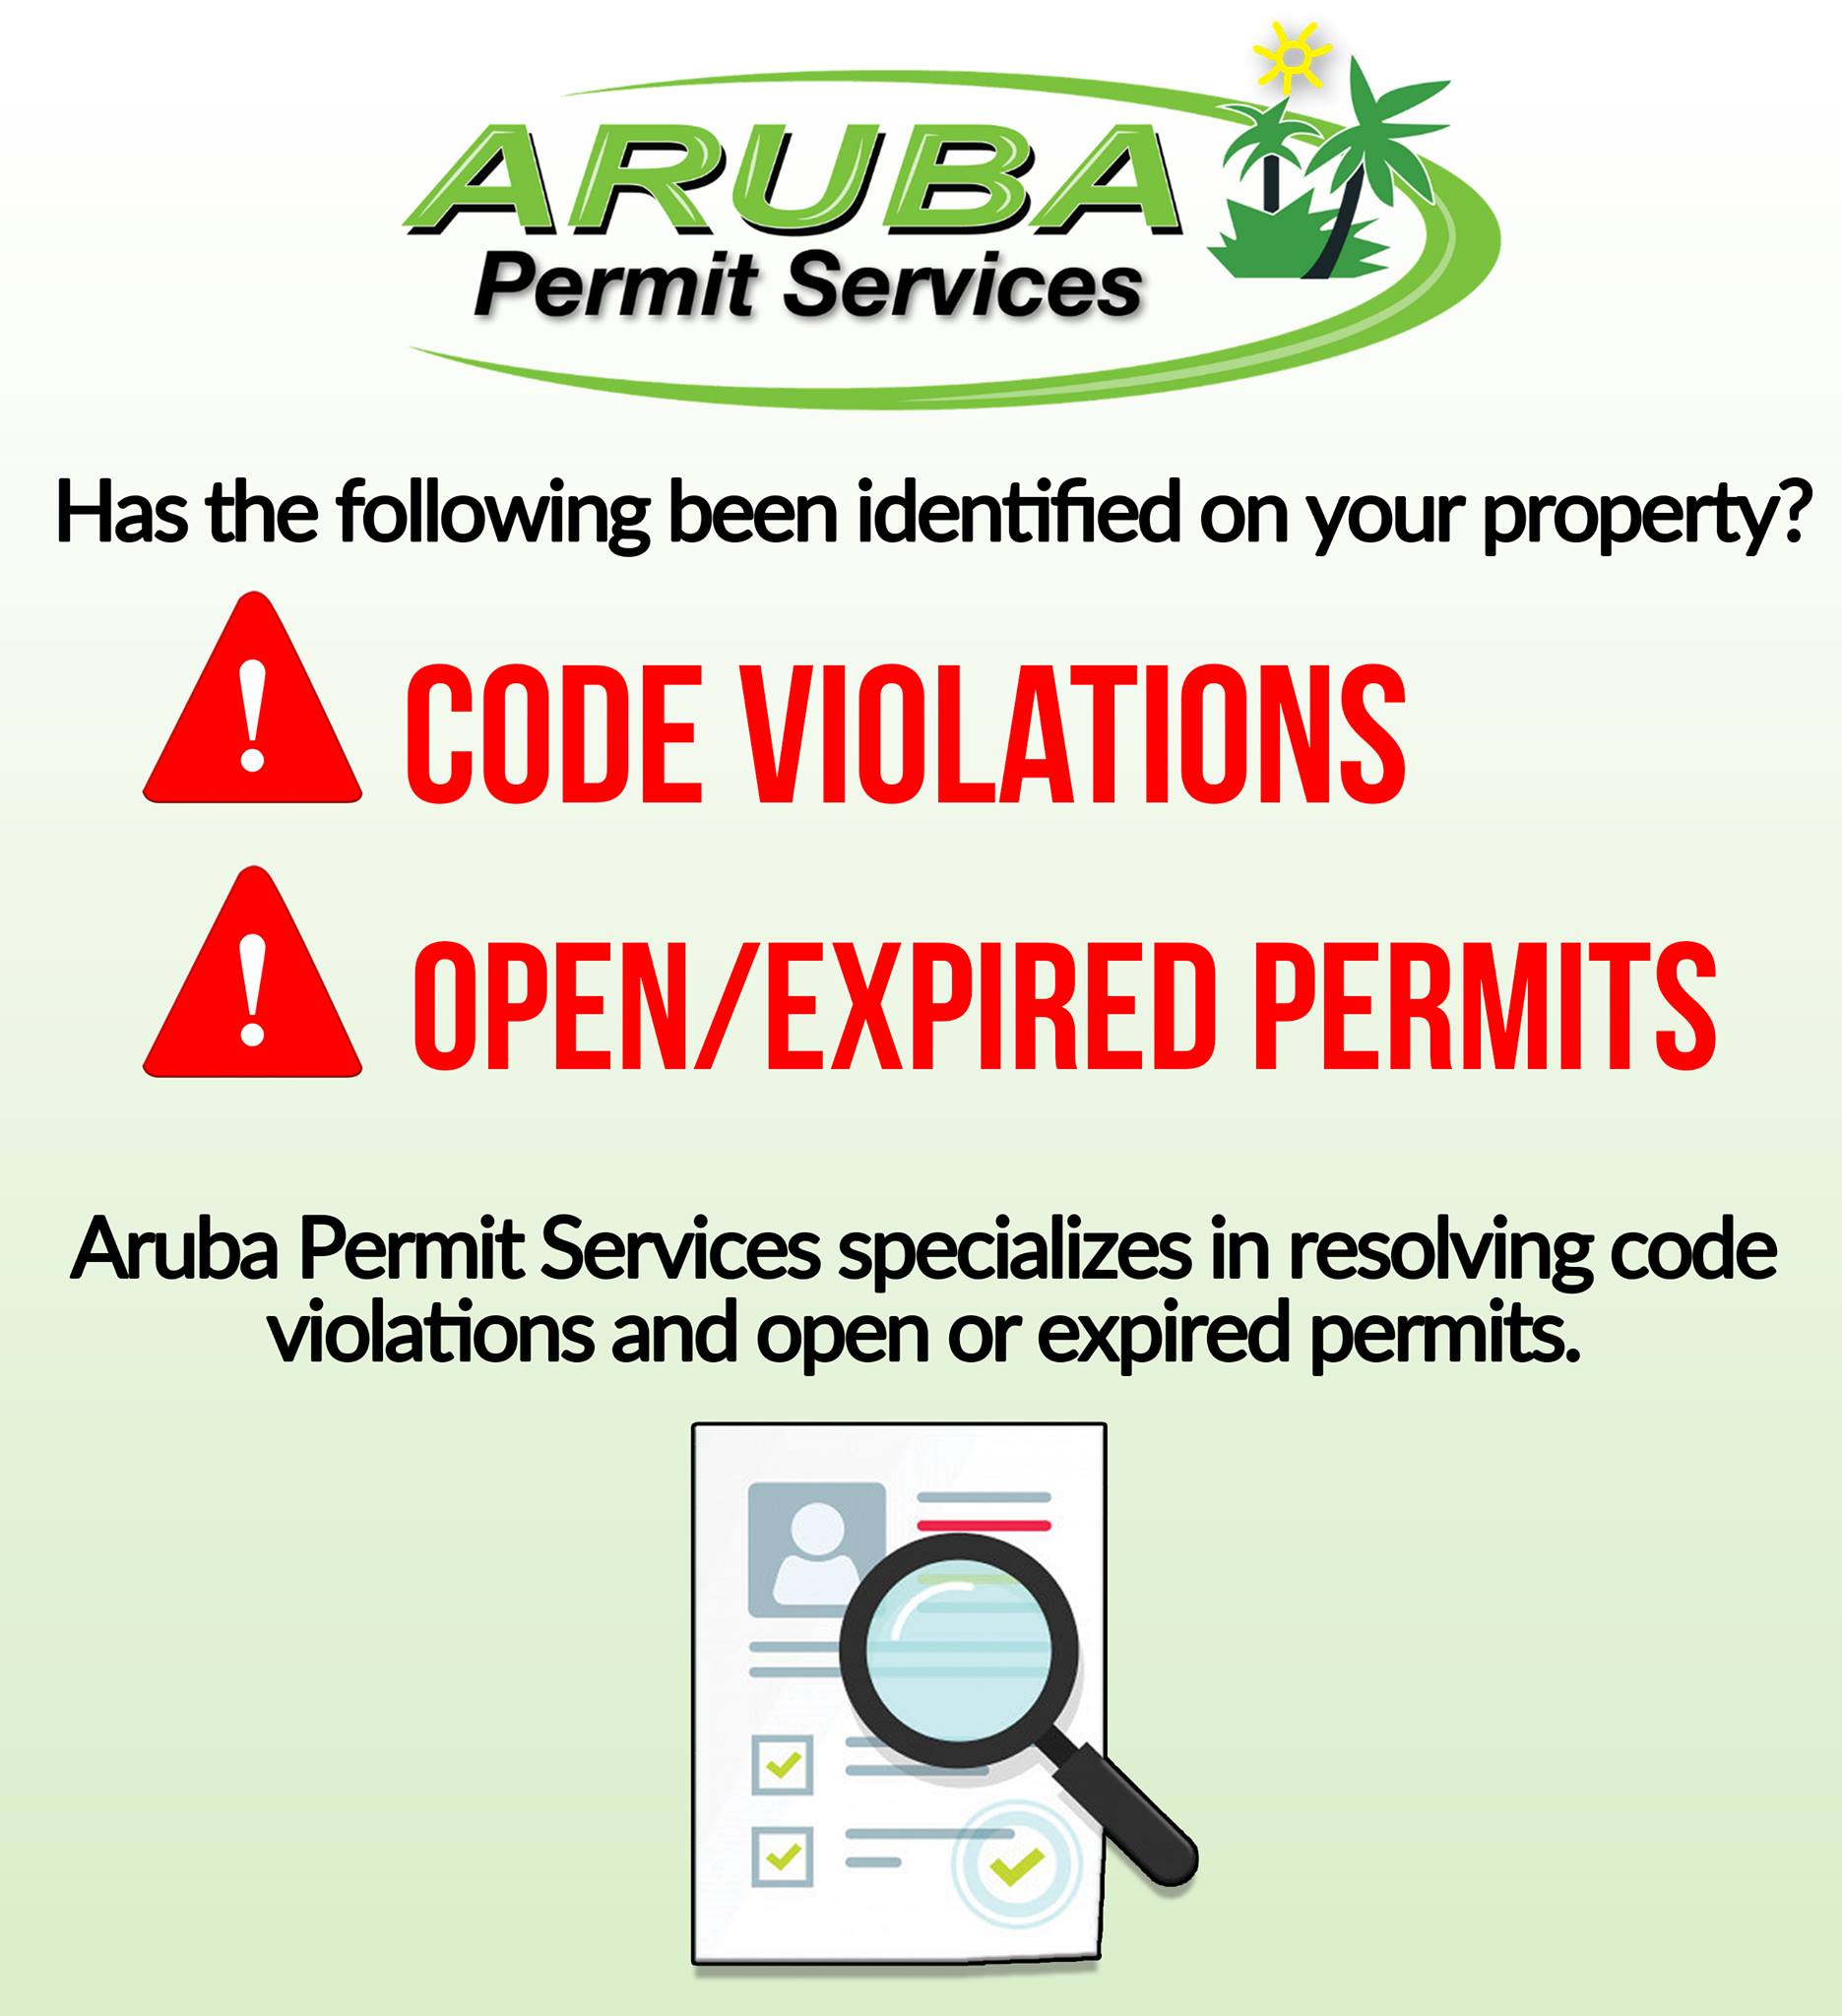 Aruba Permit Services is your one-stop-shop provider for closing all your open building permits and code violations.